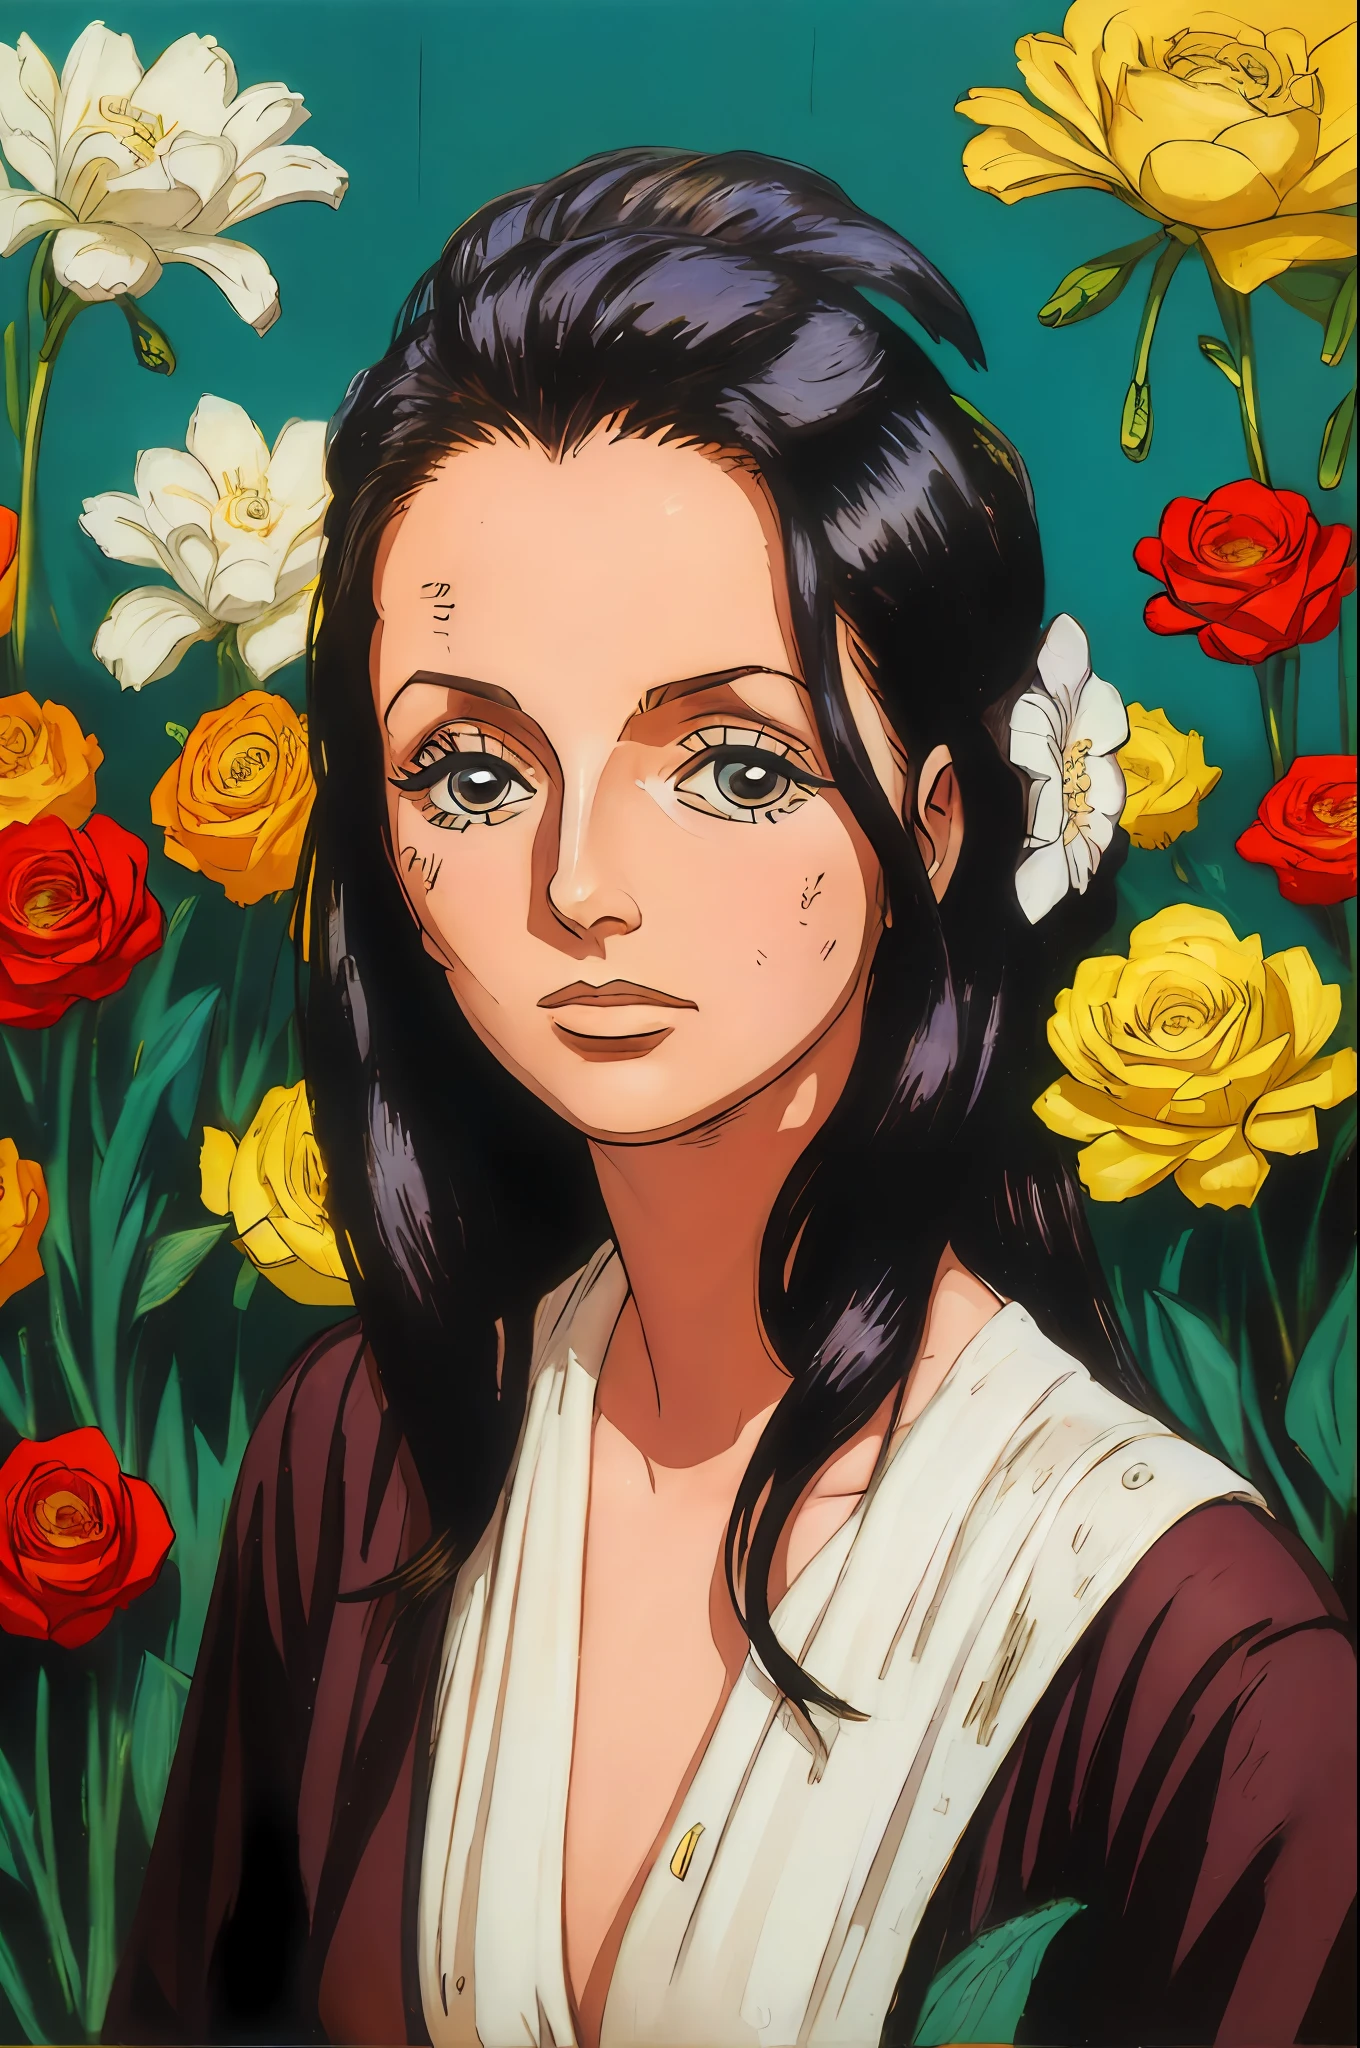 nico robin in a spy outfit, covered in grease and dirt, flower garden in the background, NSFW, vintage illustration, vibrant and bold pop art with high contrast colors, dynamic composition, and exaggerated details", EasyNegative BadHand
3DMM
wanostyle
MangaHentaiStyleConceptv2
kidbooks